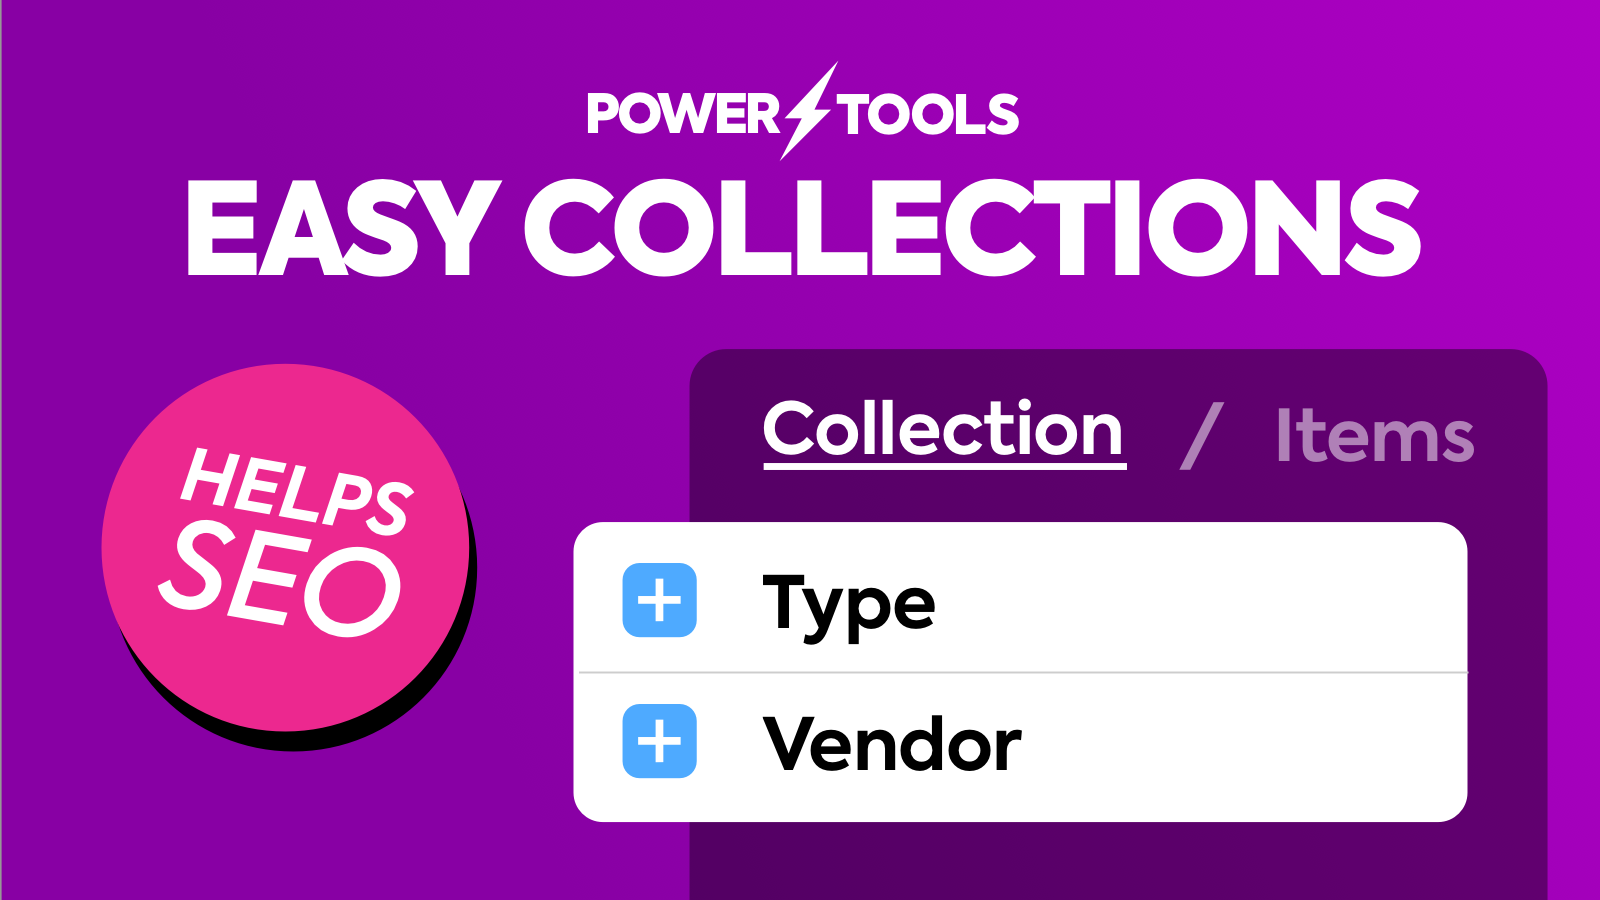 Automatically create collections for your types and brands
